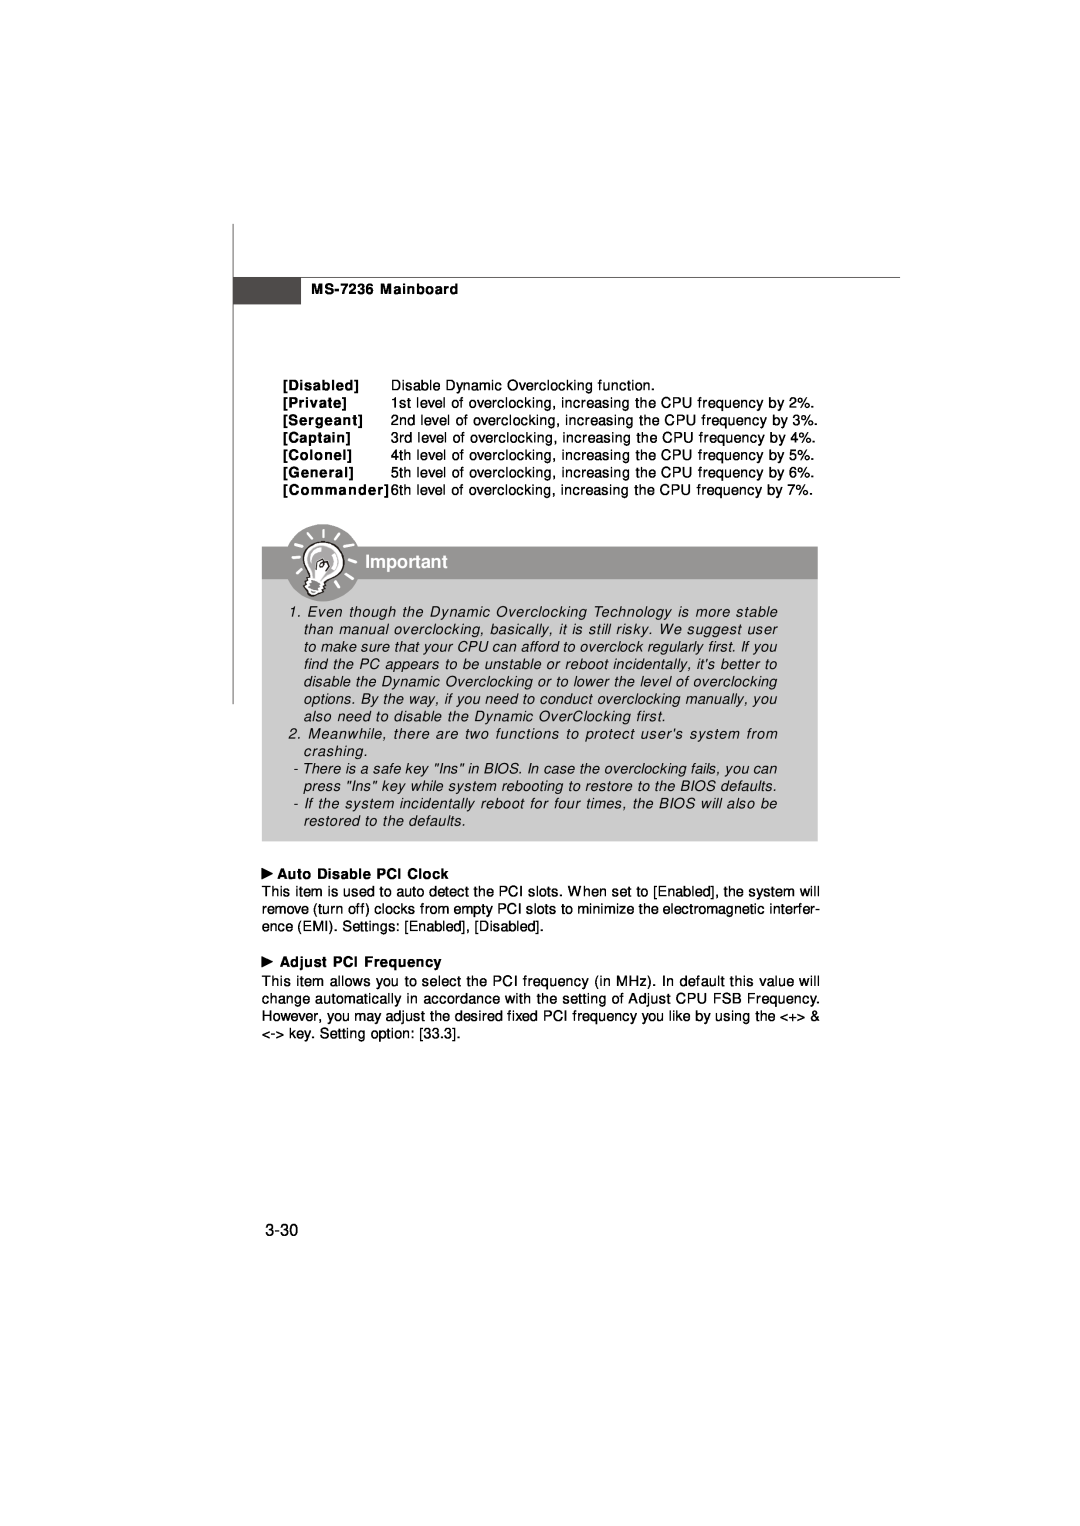 IBM G52-72361X2 manual 3-30, Disabled, Disable Dynamic Overclocking function, Private, Sergeant, Captain, Colonel, General 